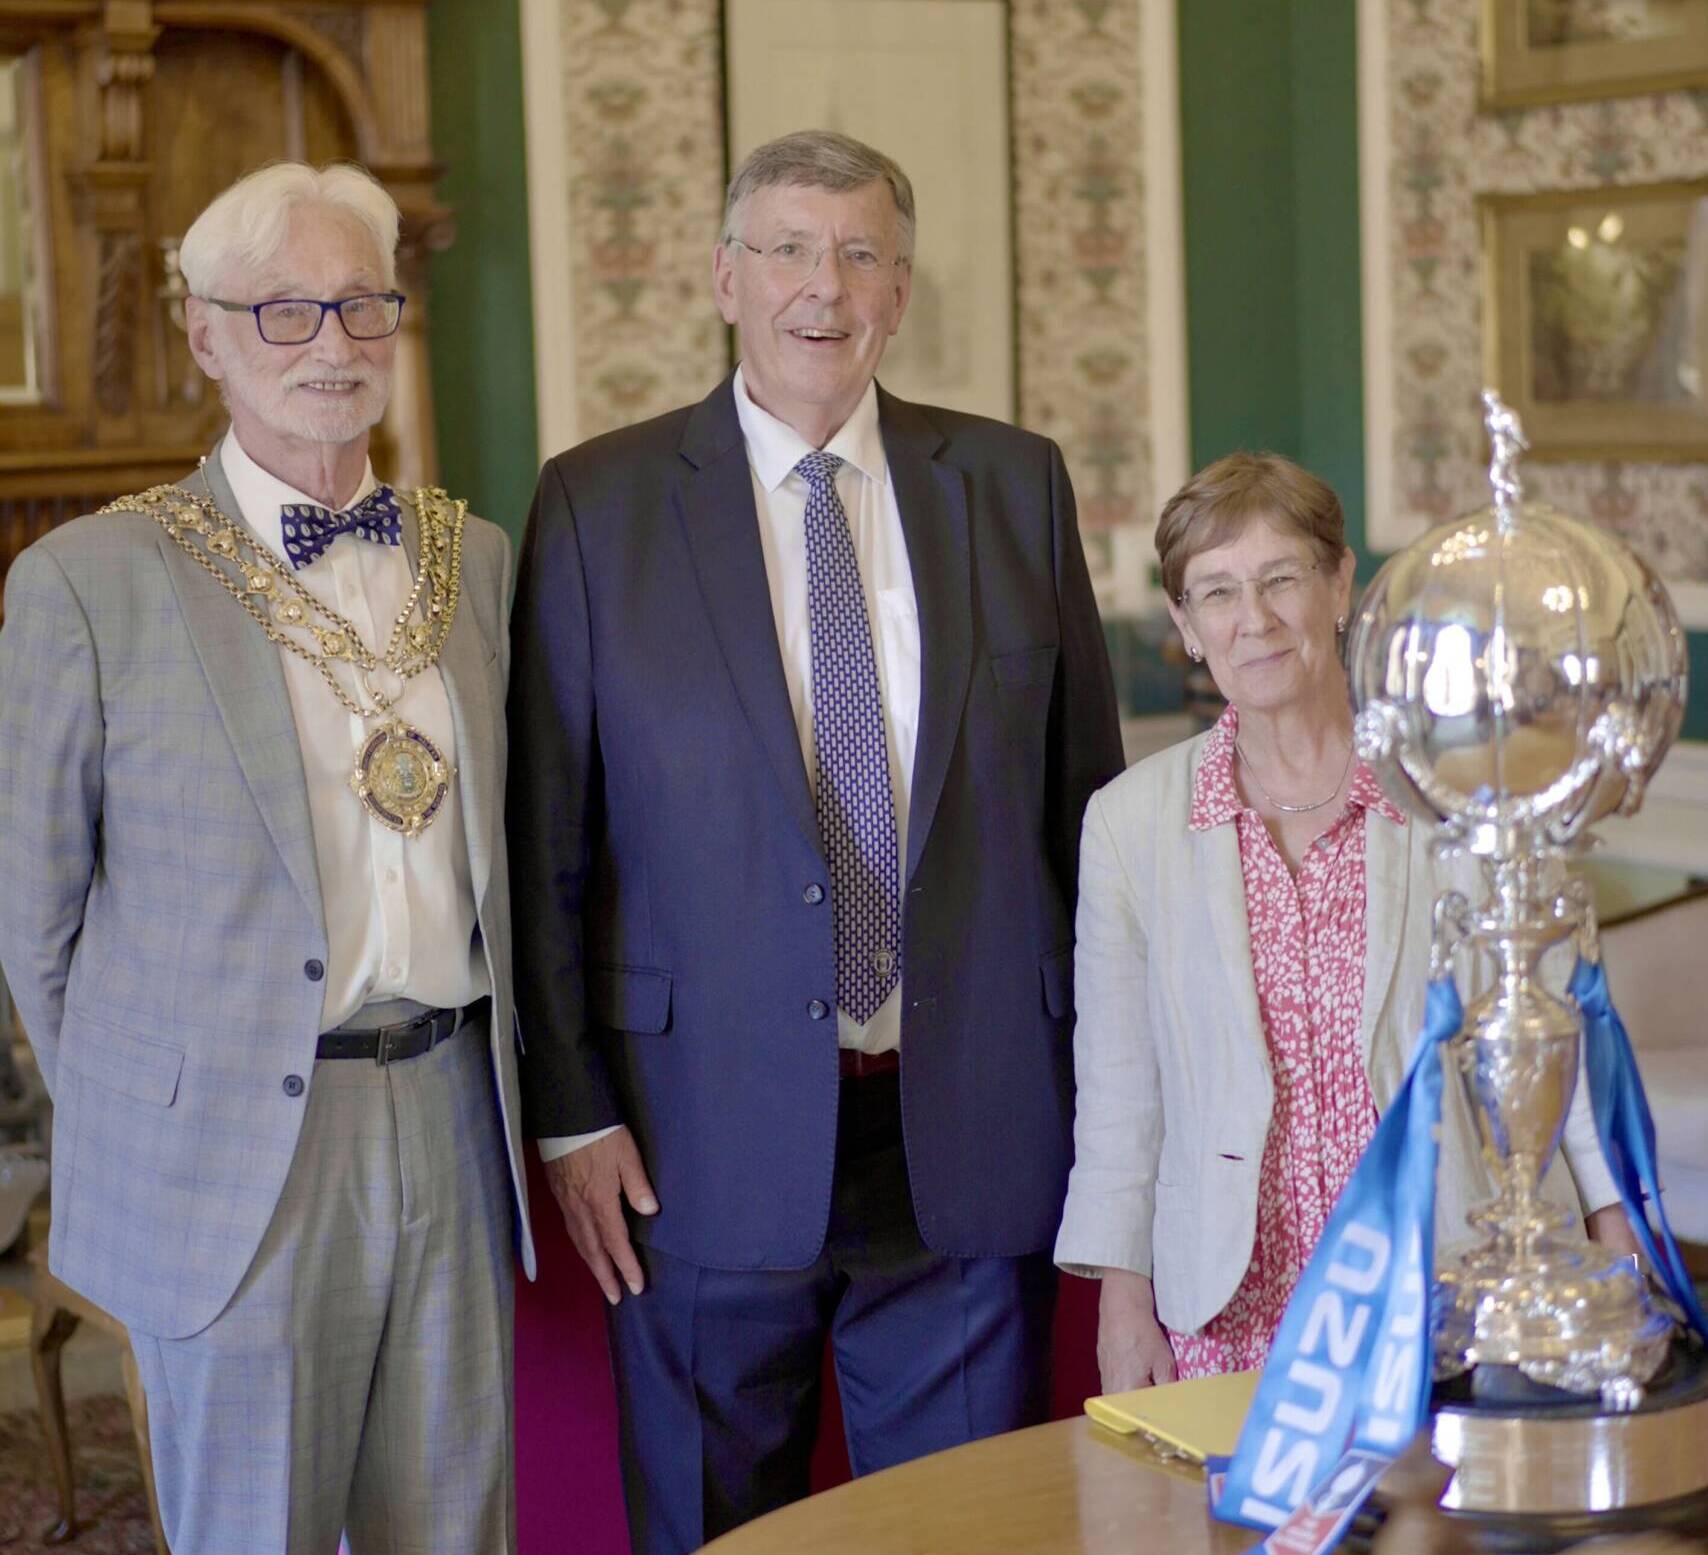 The Mayor, The Chairman of FC Halifax Town and Cllr Jane Scullion with the FA Trophy